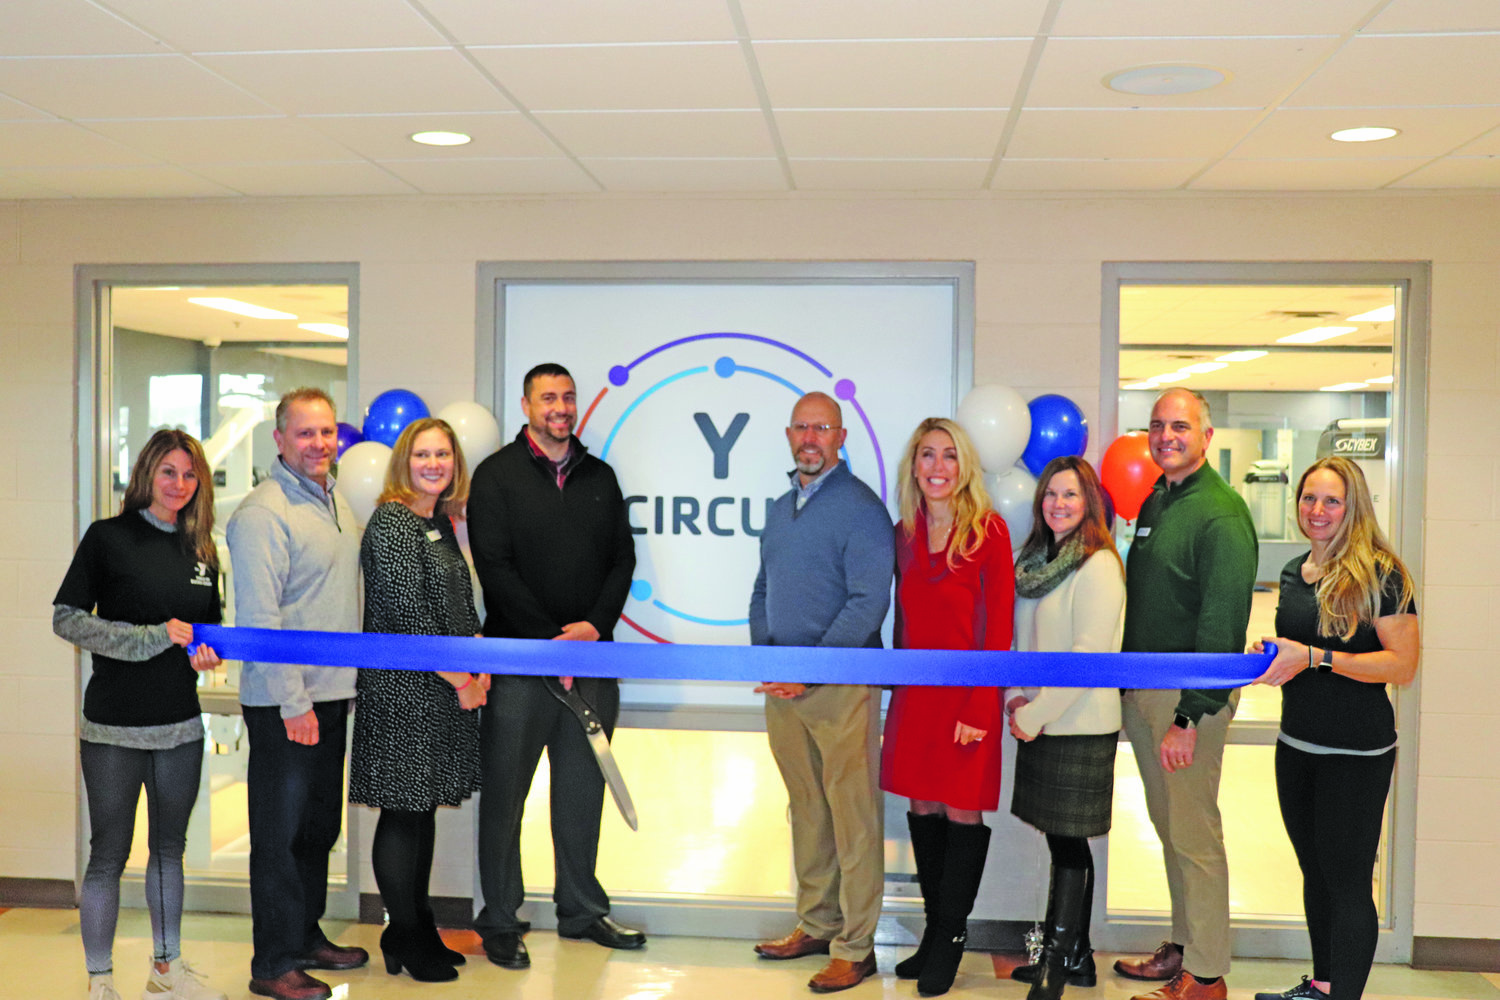 A Dec. 13 ribbon-cutting ceremony at the Y’s Quakertown branch marked the opening of the new Y Circuit Room. At the ceremony are: Jen Gaj, director of health and wellness; J.R. Hager, secretary for Upper Bucks Regional Advisory Broad; Allyson Fox, vice president of operations, Upper Bucks region; Justin Brown, chief volunteer officer for Upper Bucks Regional Advisory Board; Zane Moore, president/CEO; Tricia Feinthel, chief operations officer; Lisa Gaier, member of Upper Bucks Regional Advisory Board; Dennis Pfleiger, member of YMCA of Bucks County Association Board;  and Andrea Brown, regional director of personal training.